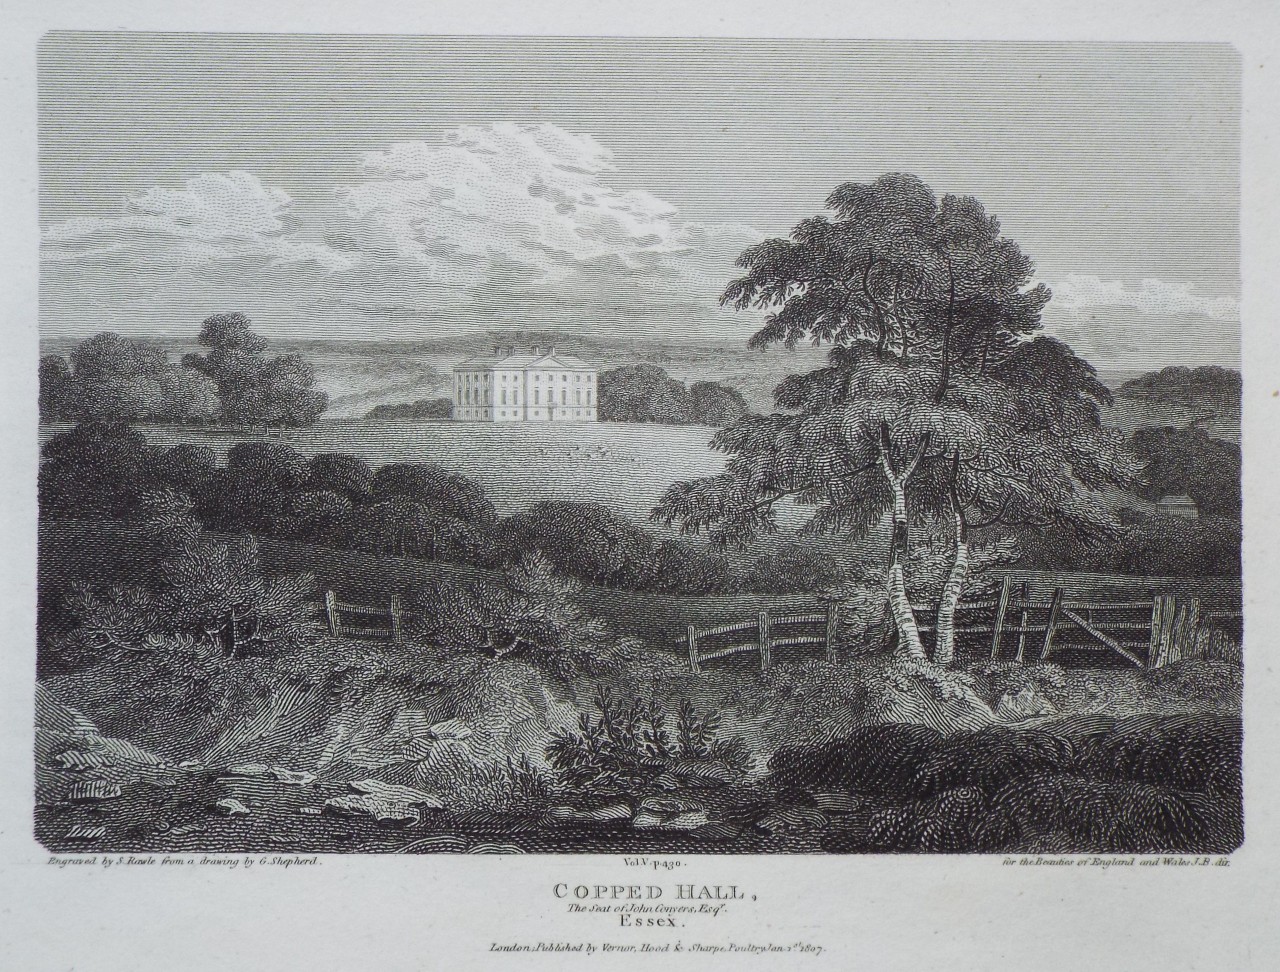 Print - Copped Hall, The Seat of John Conyers, Esqr., Essex. - Rawle